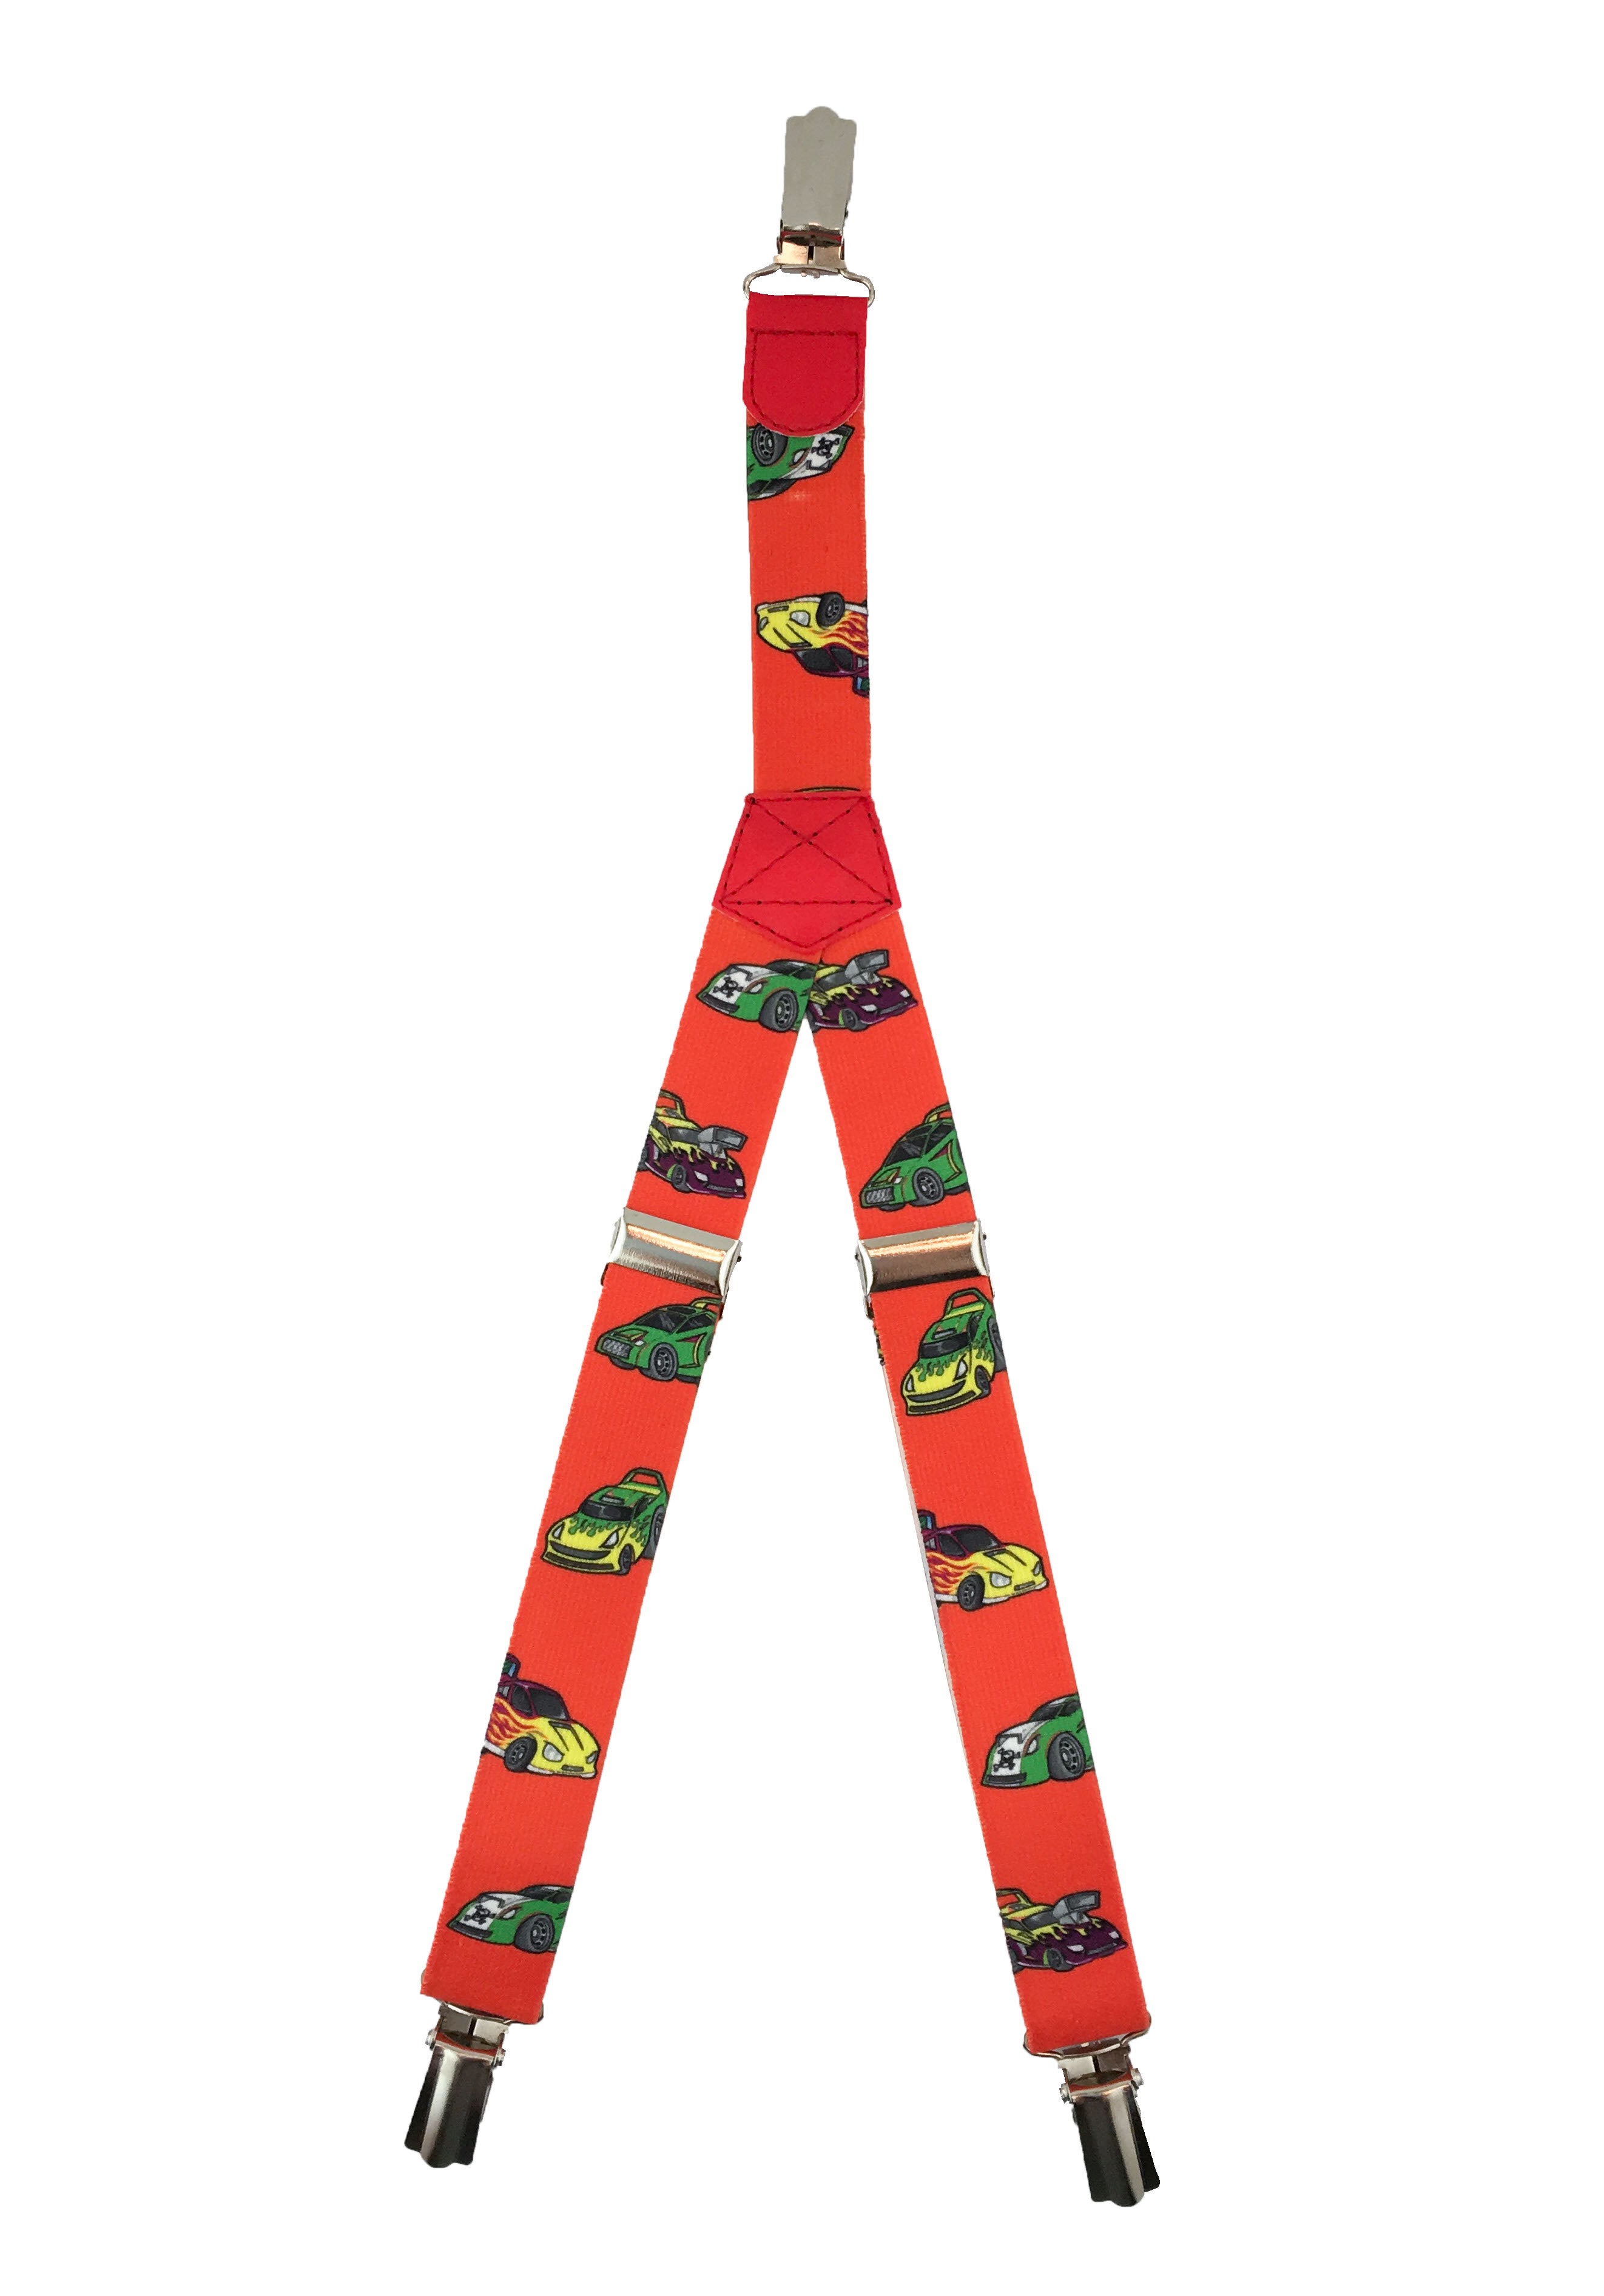 Patterned Kid's Clip Suspenders - Orange Tuned Up Cars